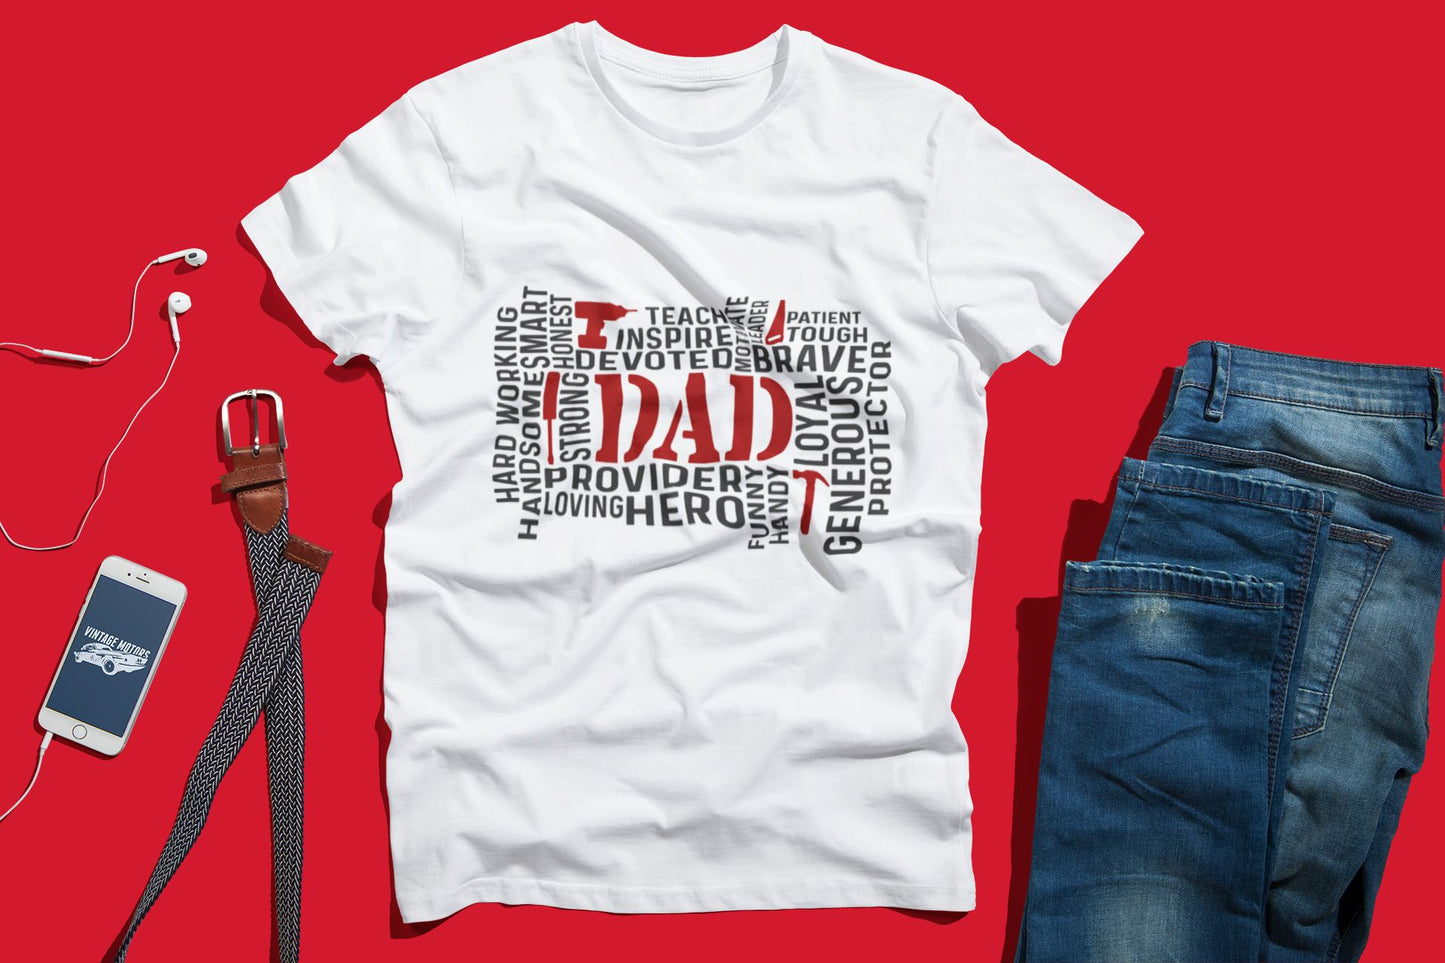 B1ack by Design LLC Fatherhood Themed T-Shirts, Father's Day Shirts, Husband, Daddy, Protector, Hero, Best Dad Ever, Dad Jokes Dad Word Cloud / L / Black